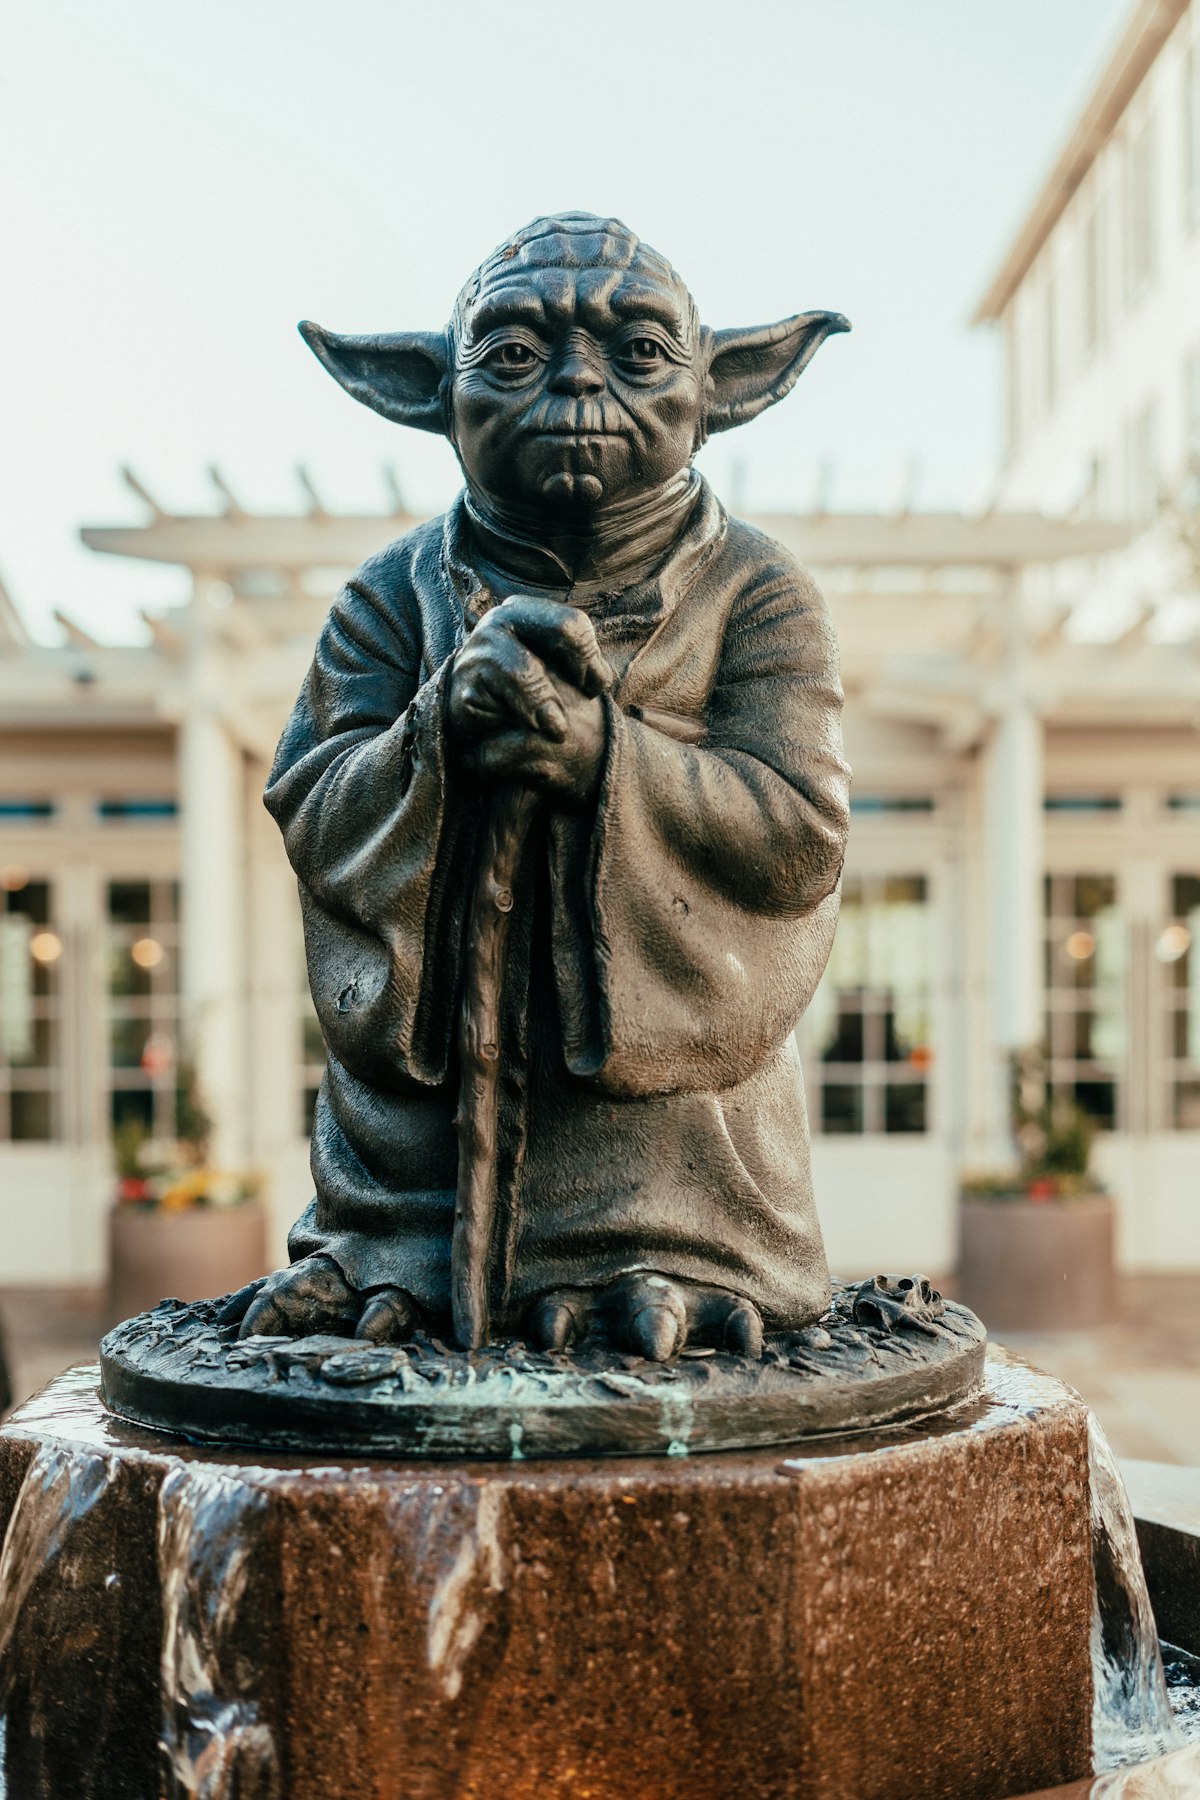 "Do or do not. There is no try." [9|14]